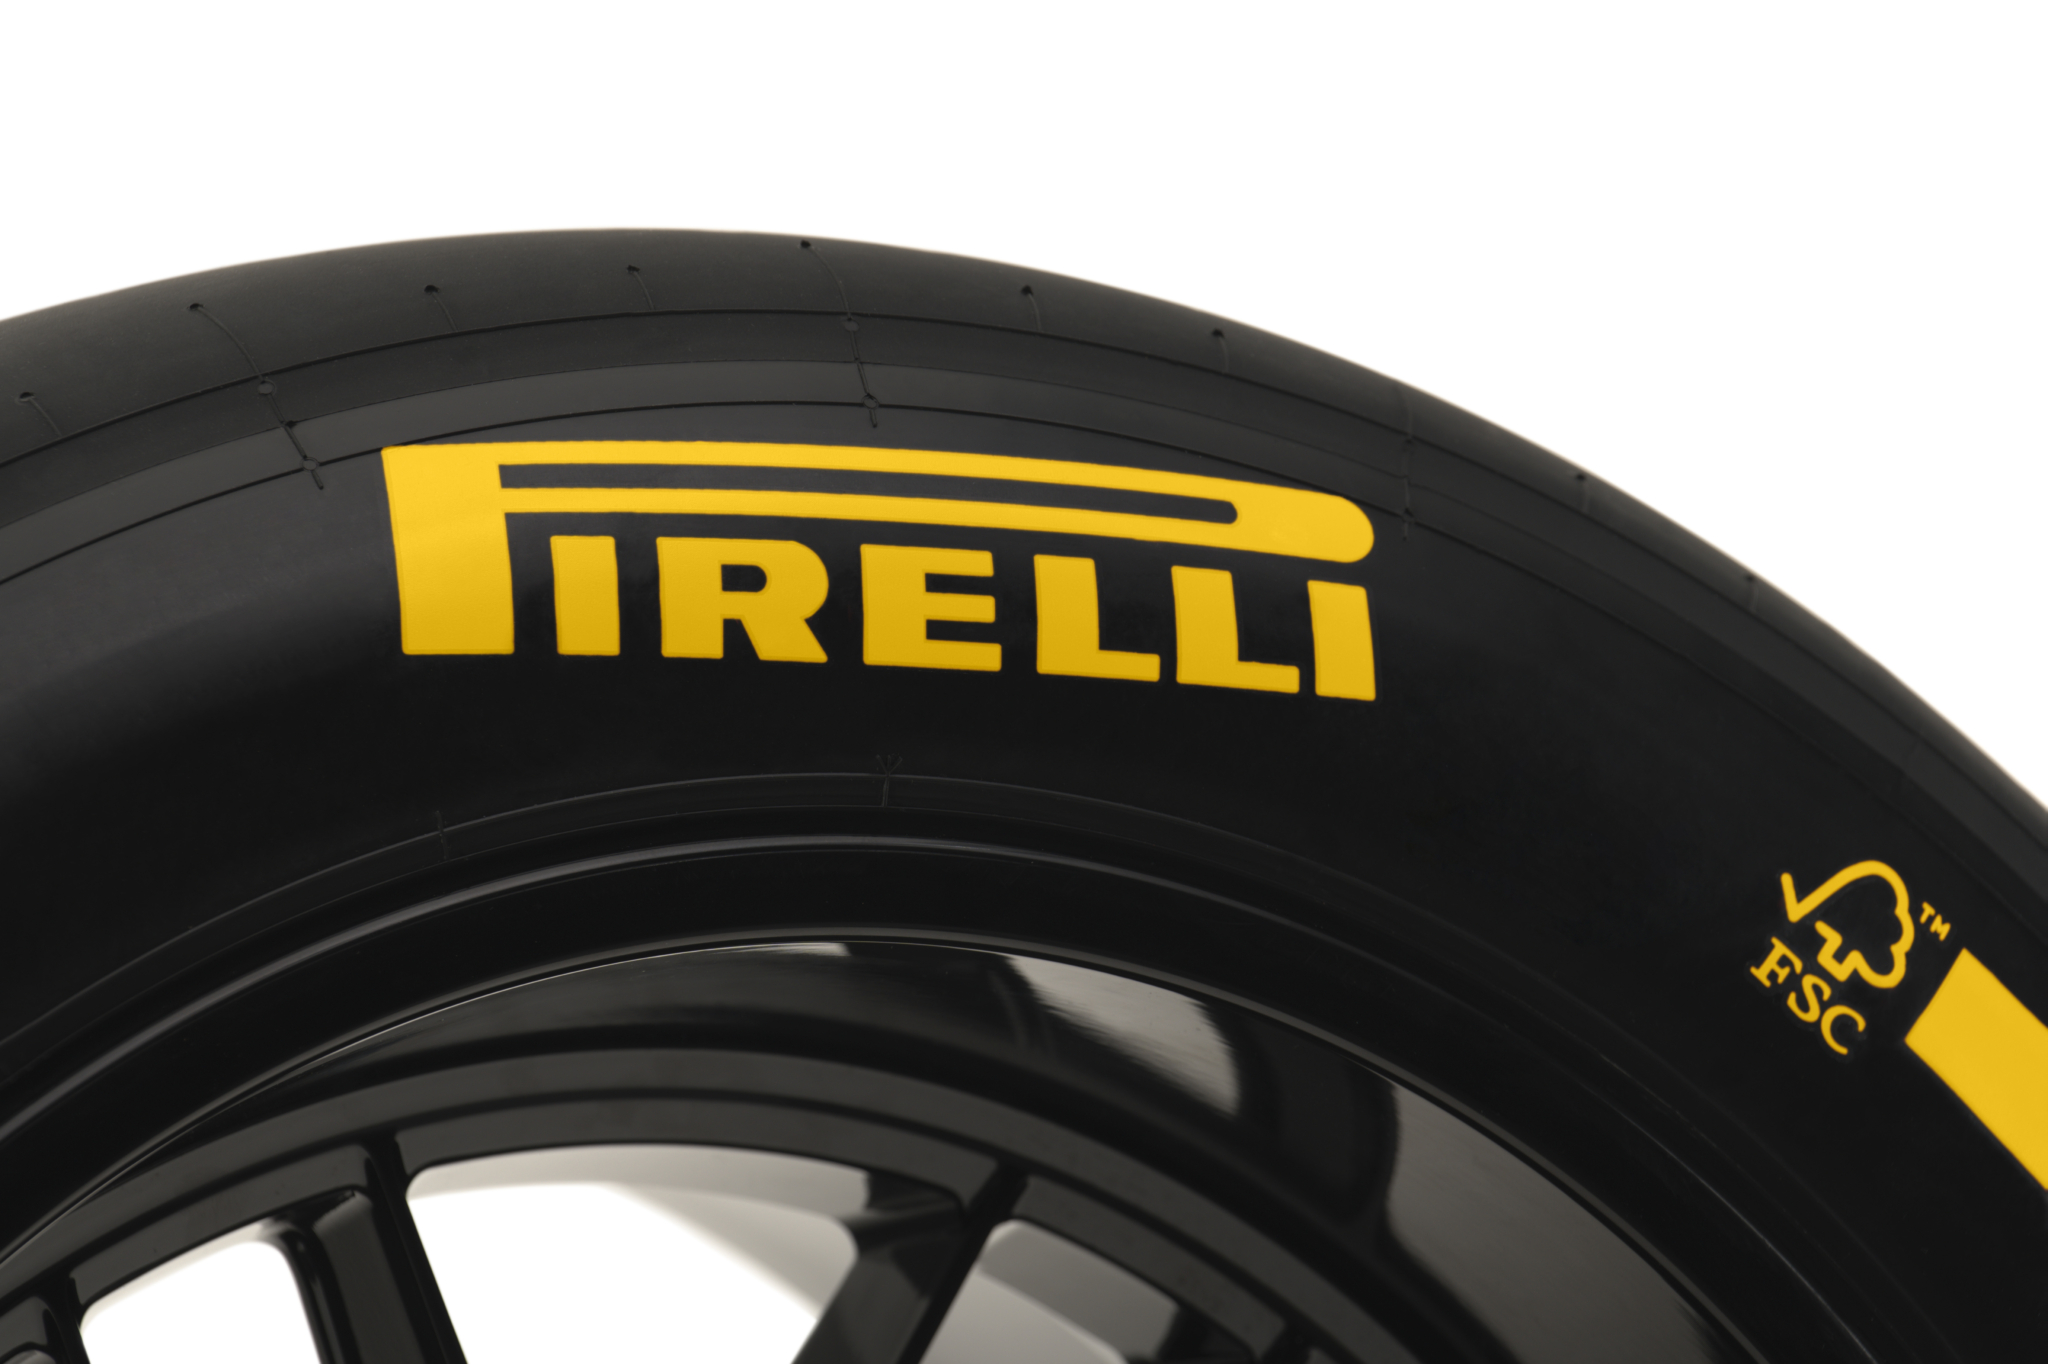 Pirelli F1 tyres are FSC certified, demonstrating boosted sustainability